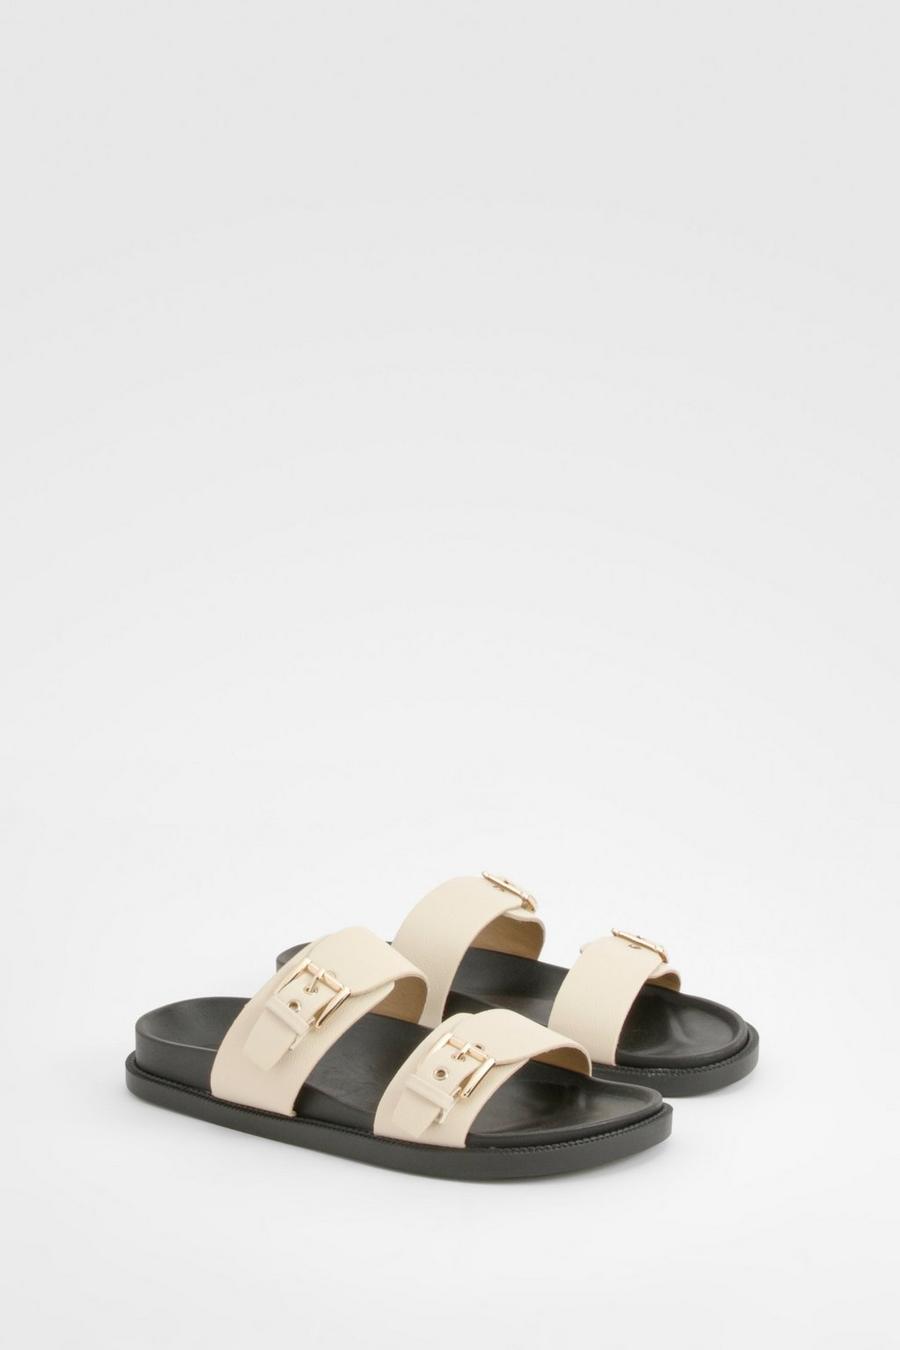 Cream Double Strap Footbed Buckle Sliders   